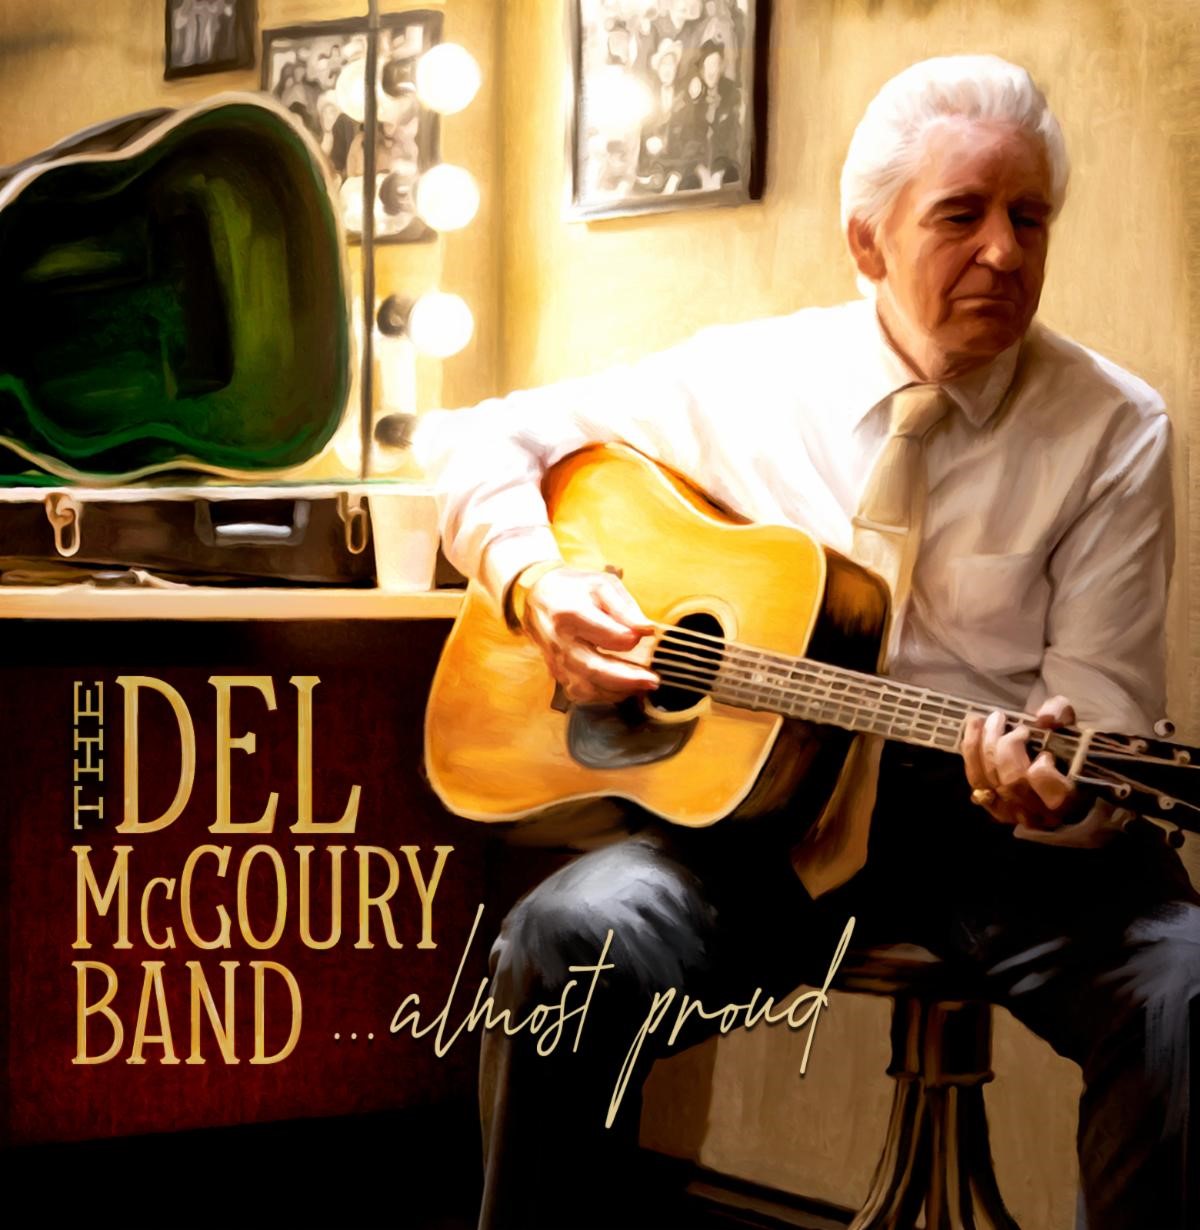 Del McCoury Mines Songwriting Gold For New Album Almost Proud